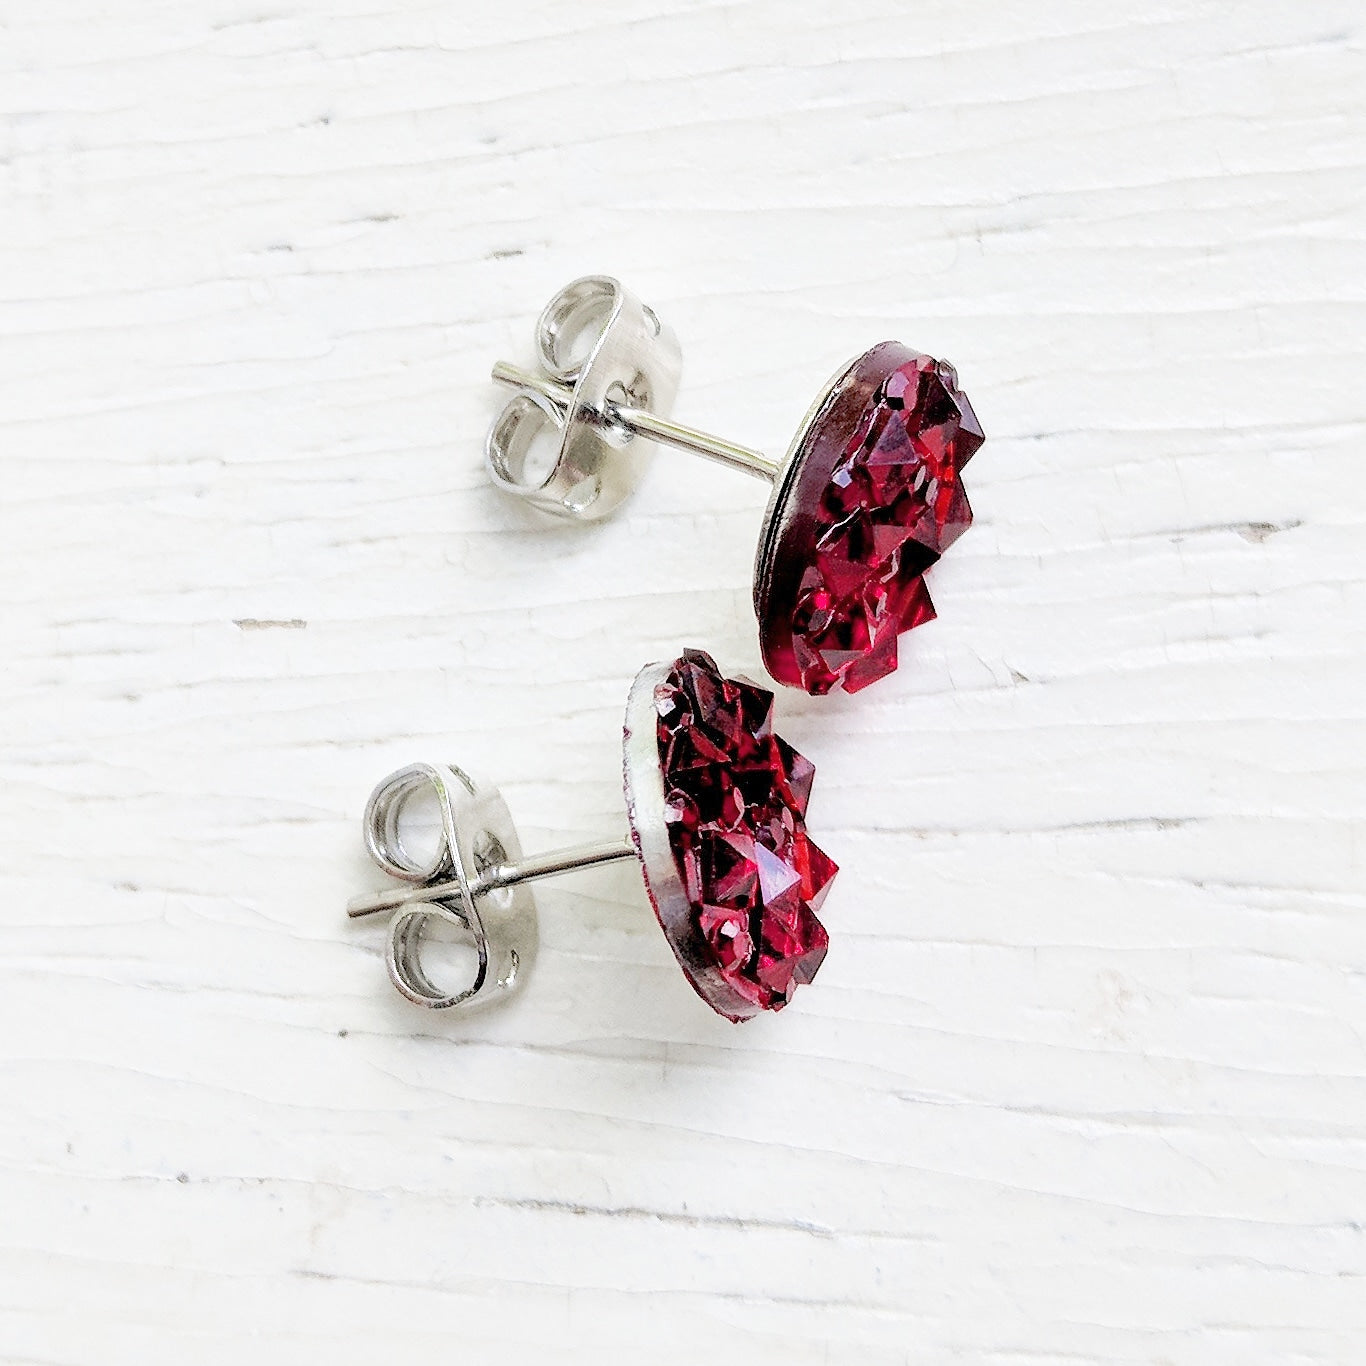 Red Sparkly Stud Earrings - Hypoallergenic